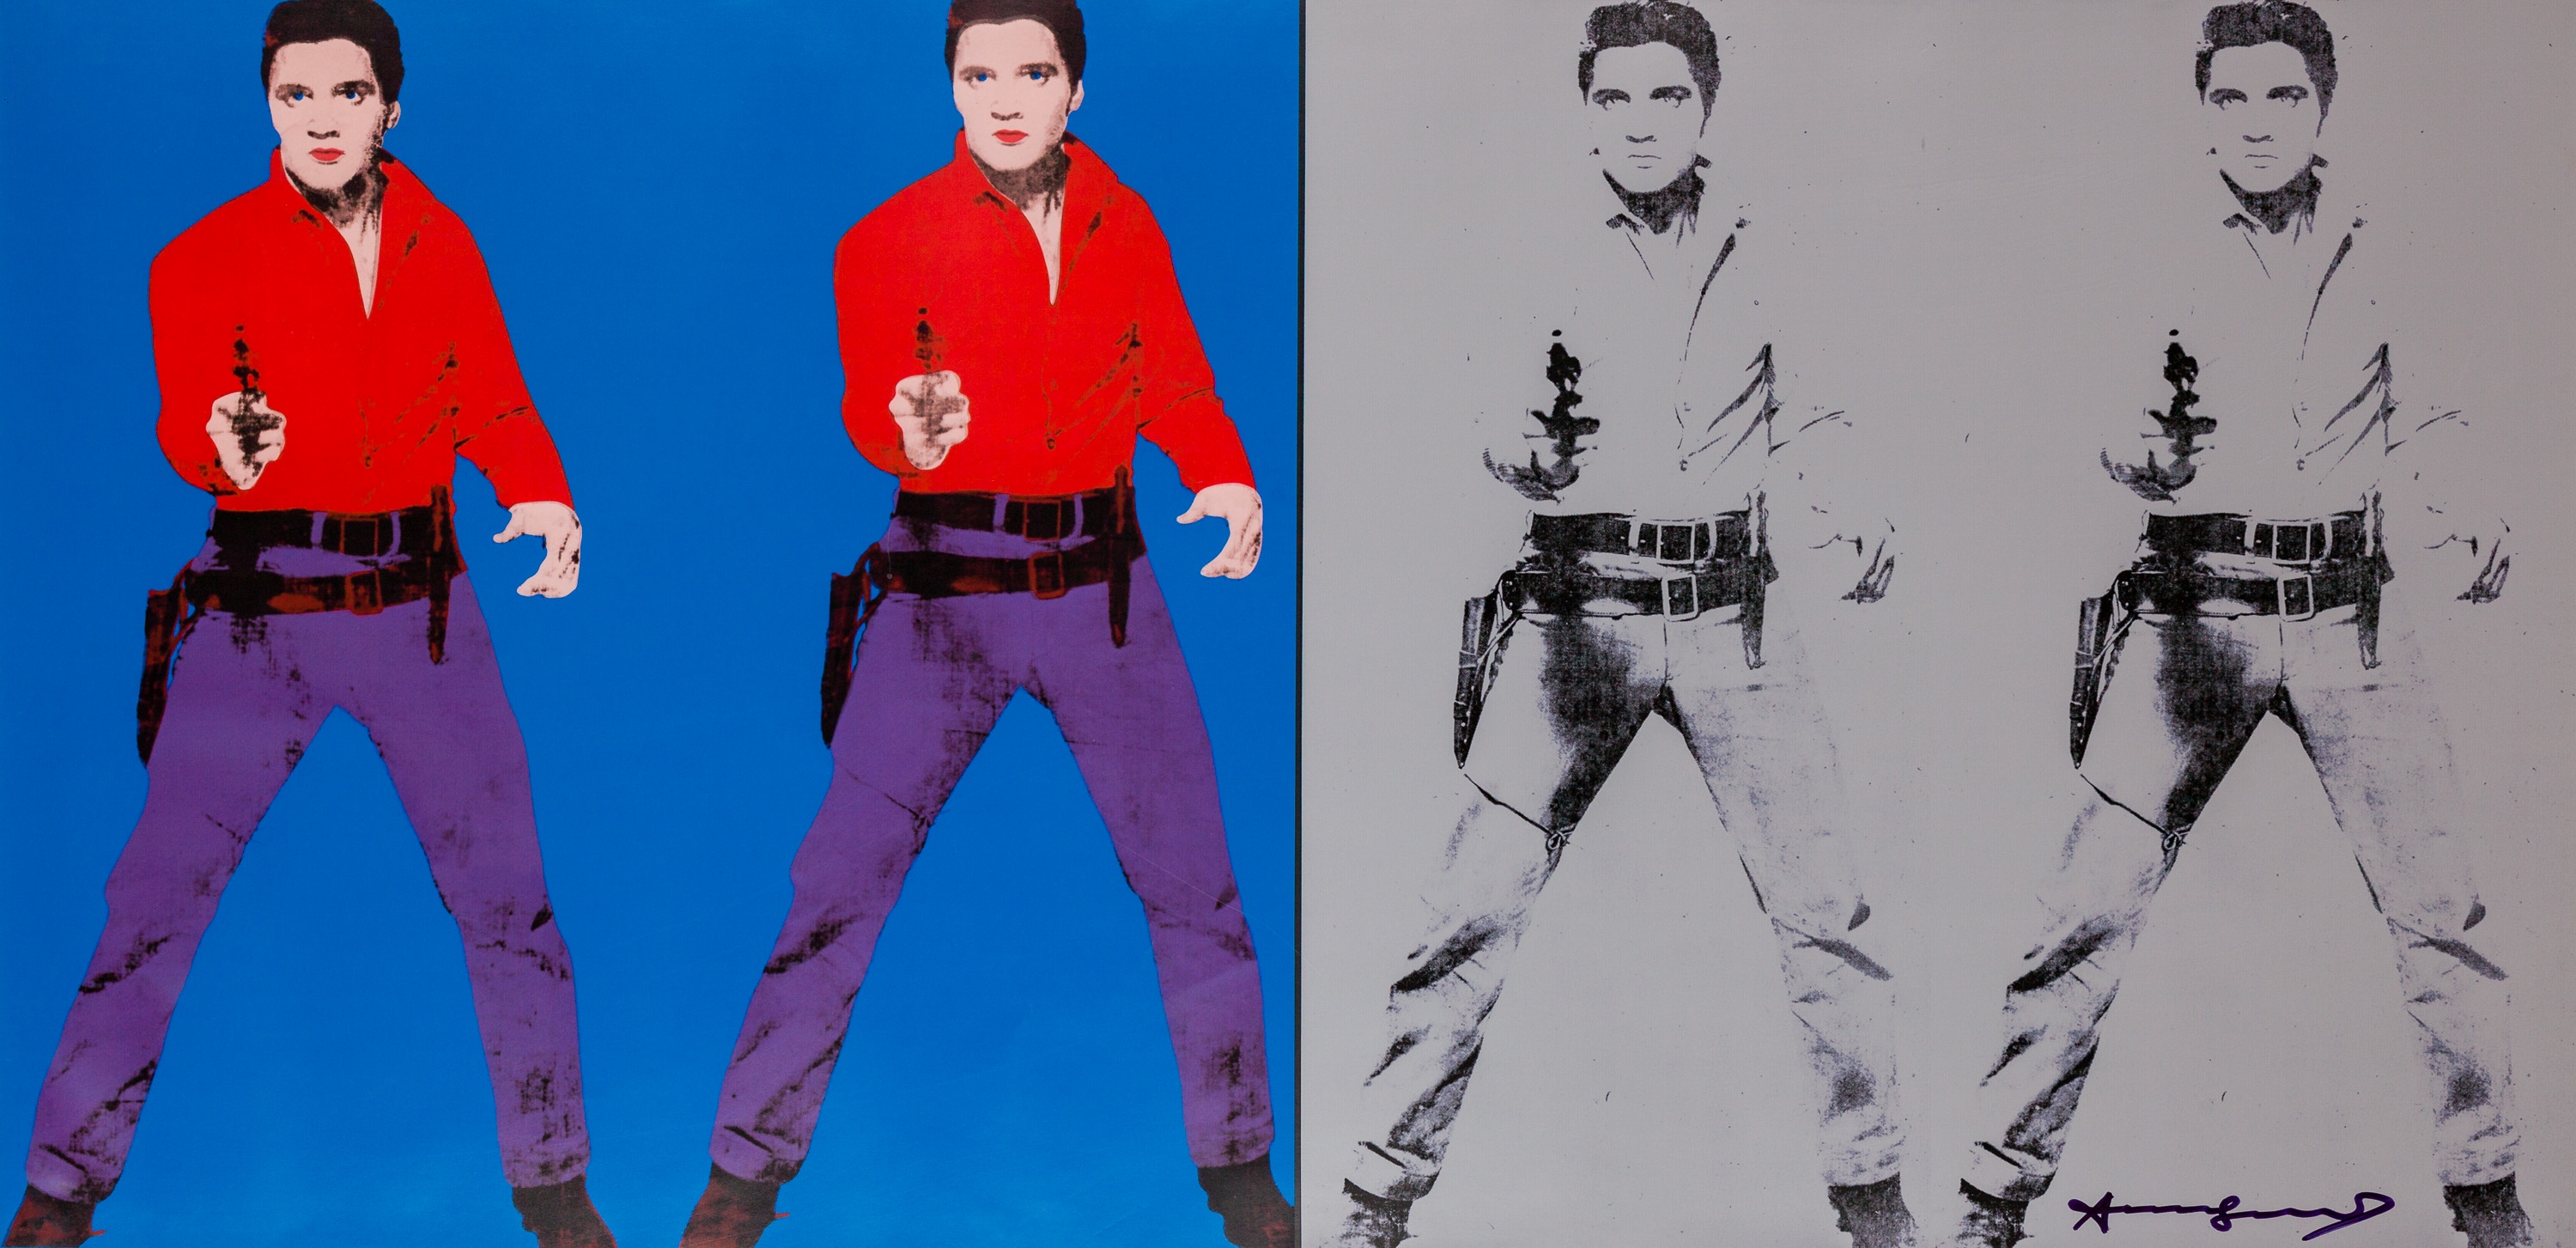 Double Elvis by Andy Warhol, 1963/1964